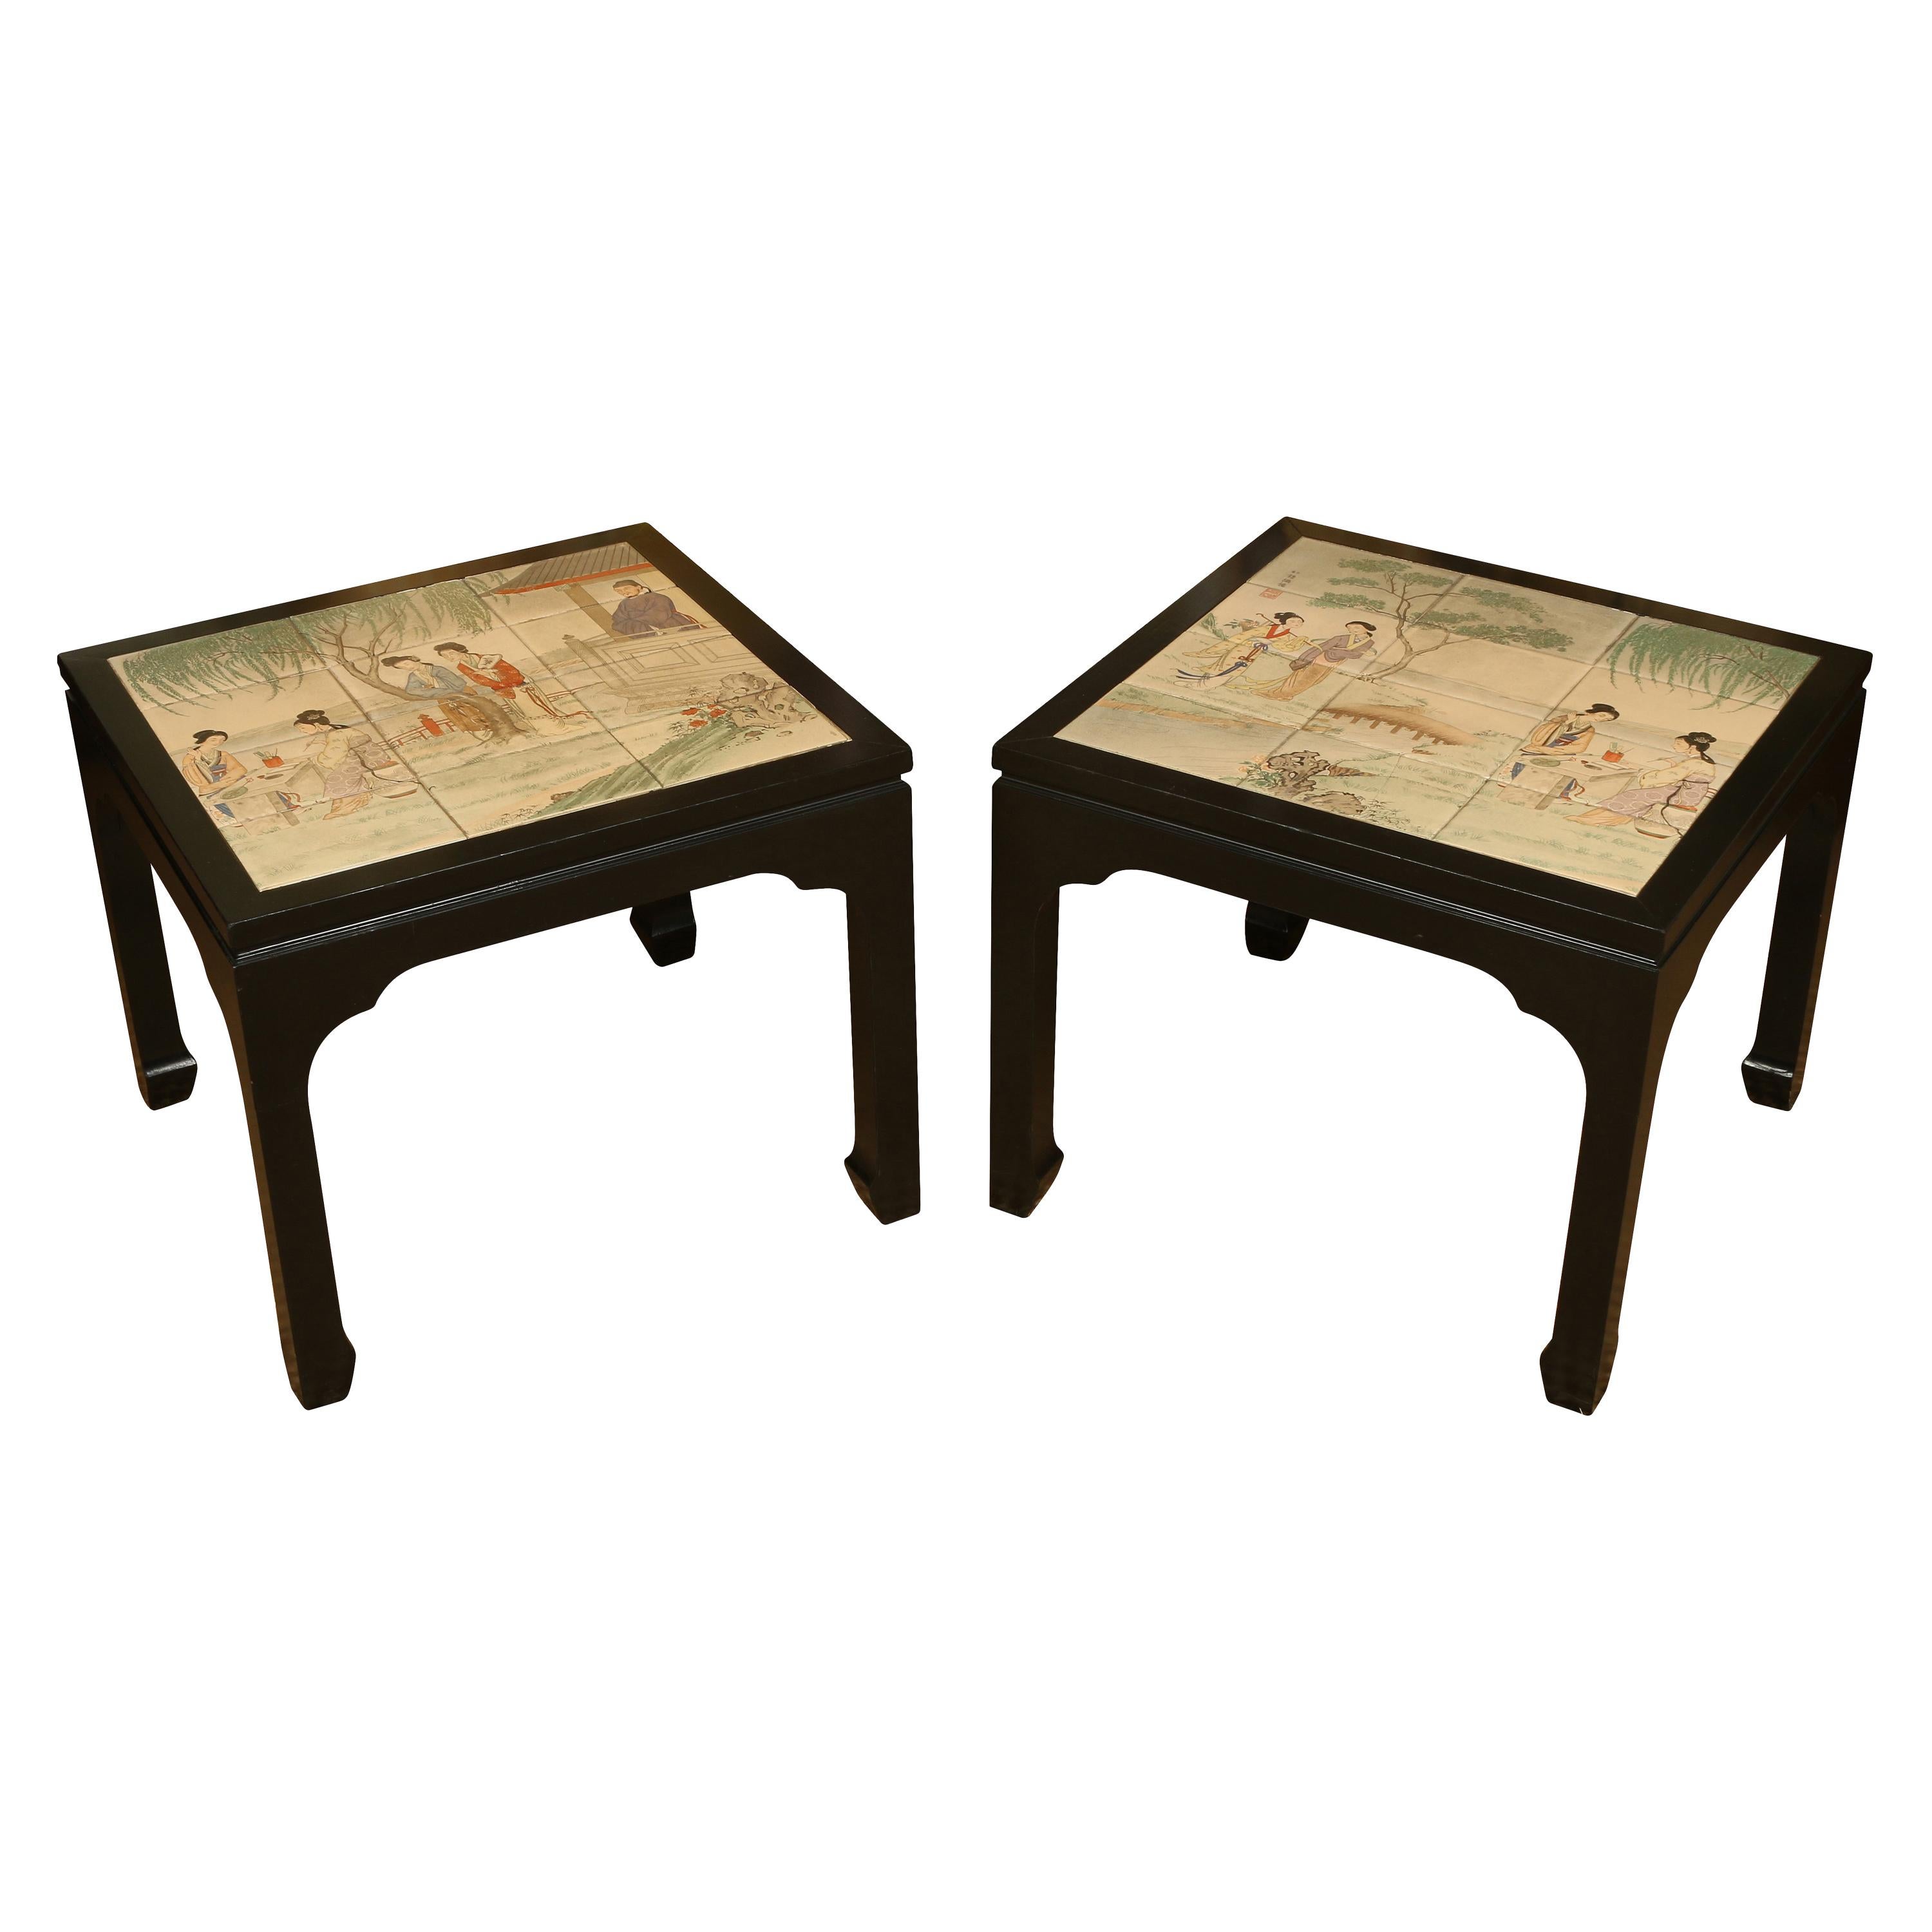 Pair of Chinese Style Inset Ceramic Tile Side Tables For Sale